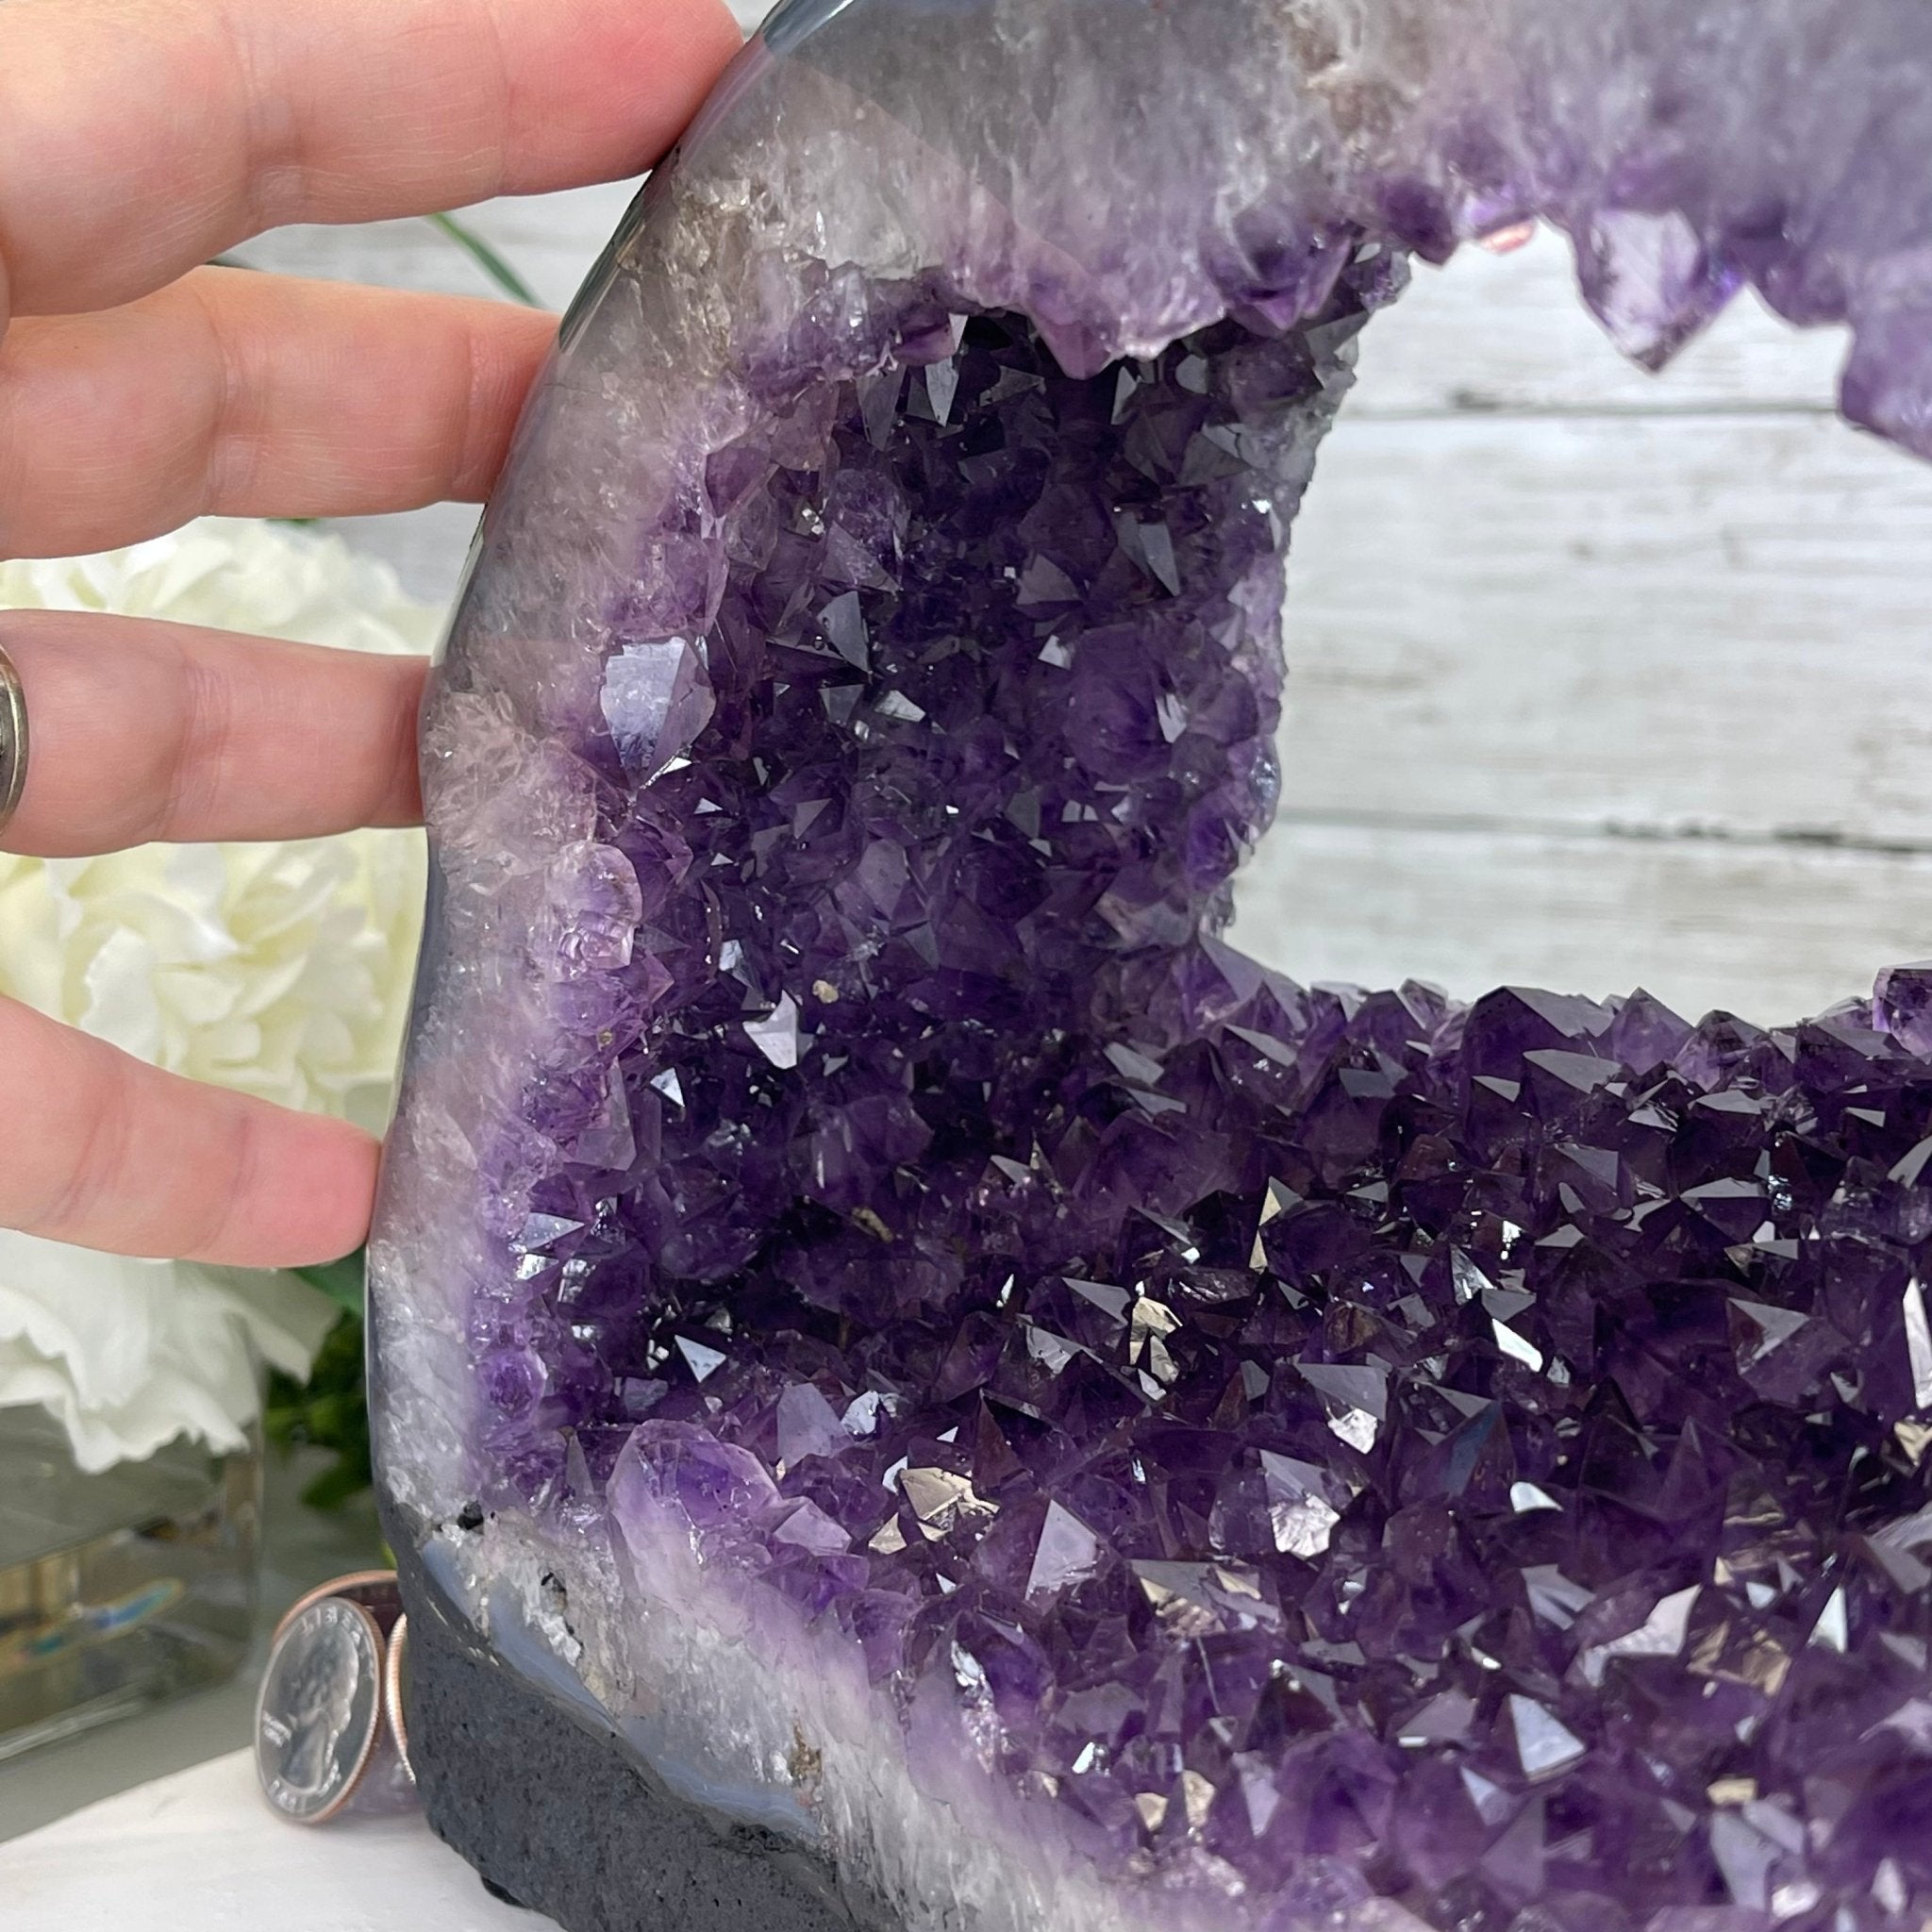 Extra Plus Quality Open 2-Sided Brazilian Amethyst Cathedral, 16.8 lbs, 10.2" tall, #5605-0085 by Brazil Gems - Brazil GemsBrazil GemsExtra Plus Quality Open 2-Sided Brazilian Amethyst Cathedral, 16.8 lbs, 10.2" tall, #5605-0085 by Brazil GemsOpen 2-Sided Cathedrals5605-0085